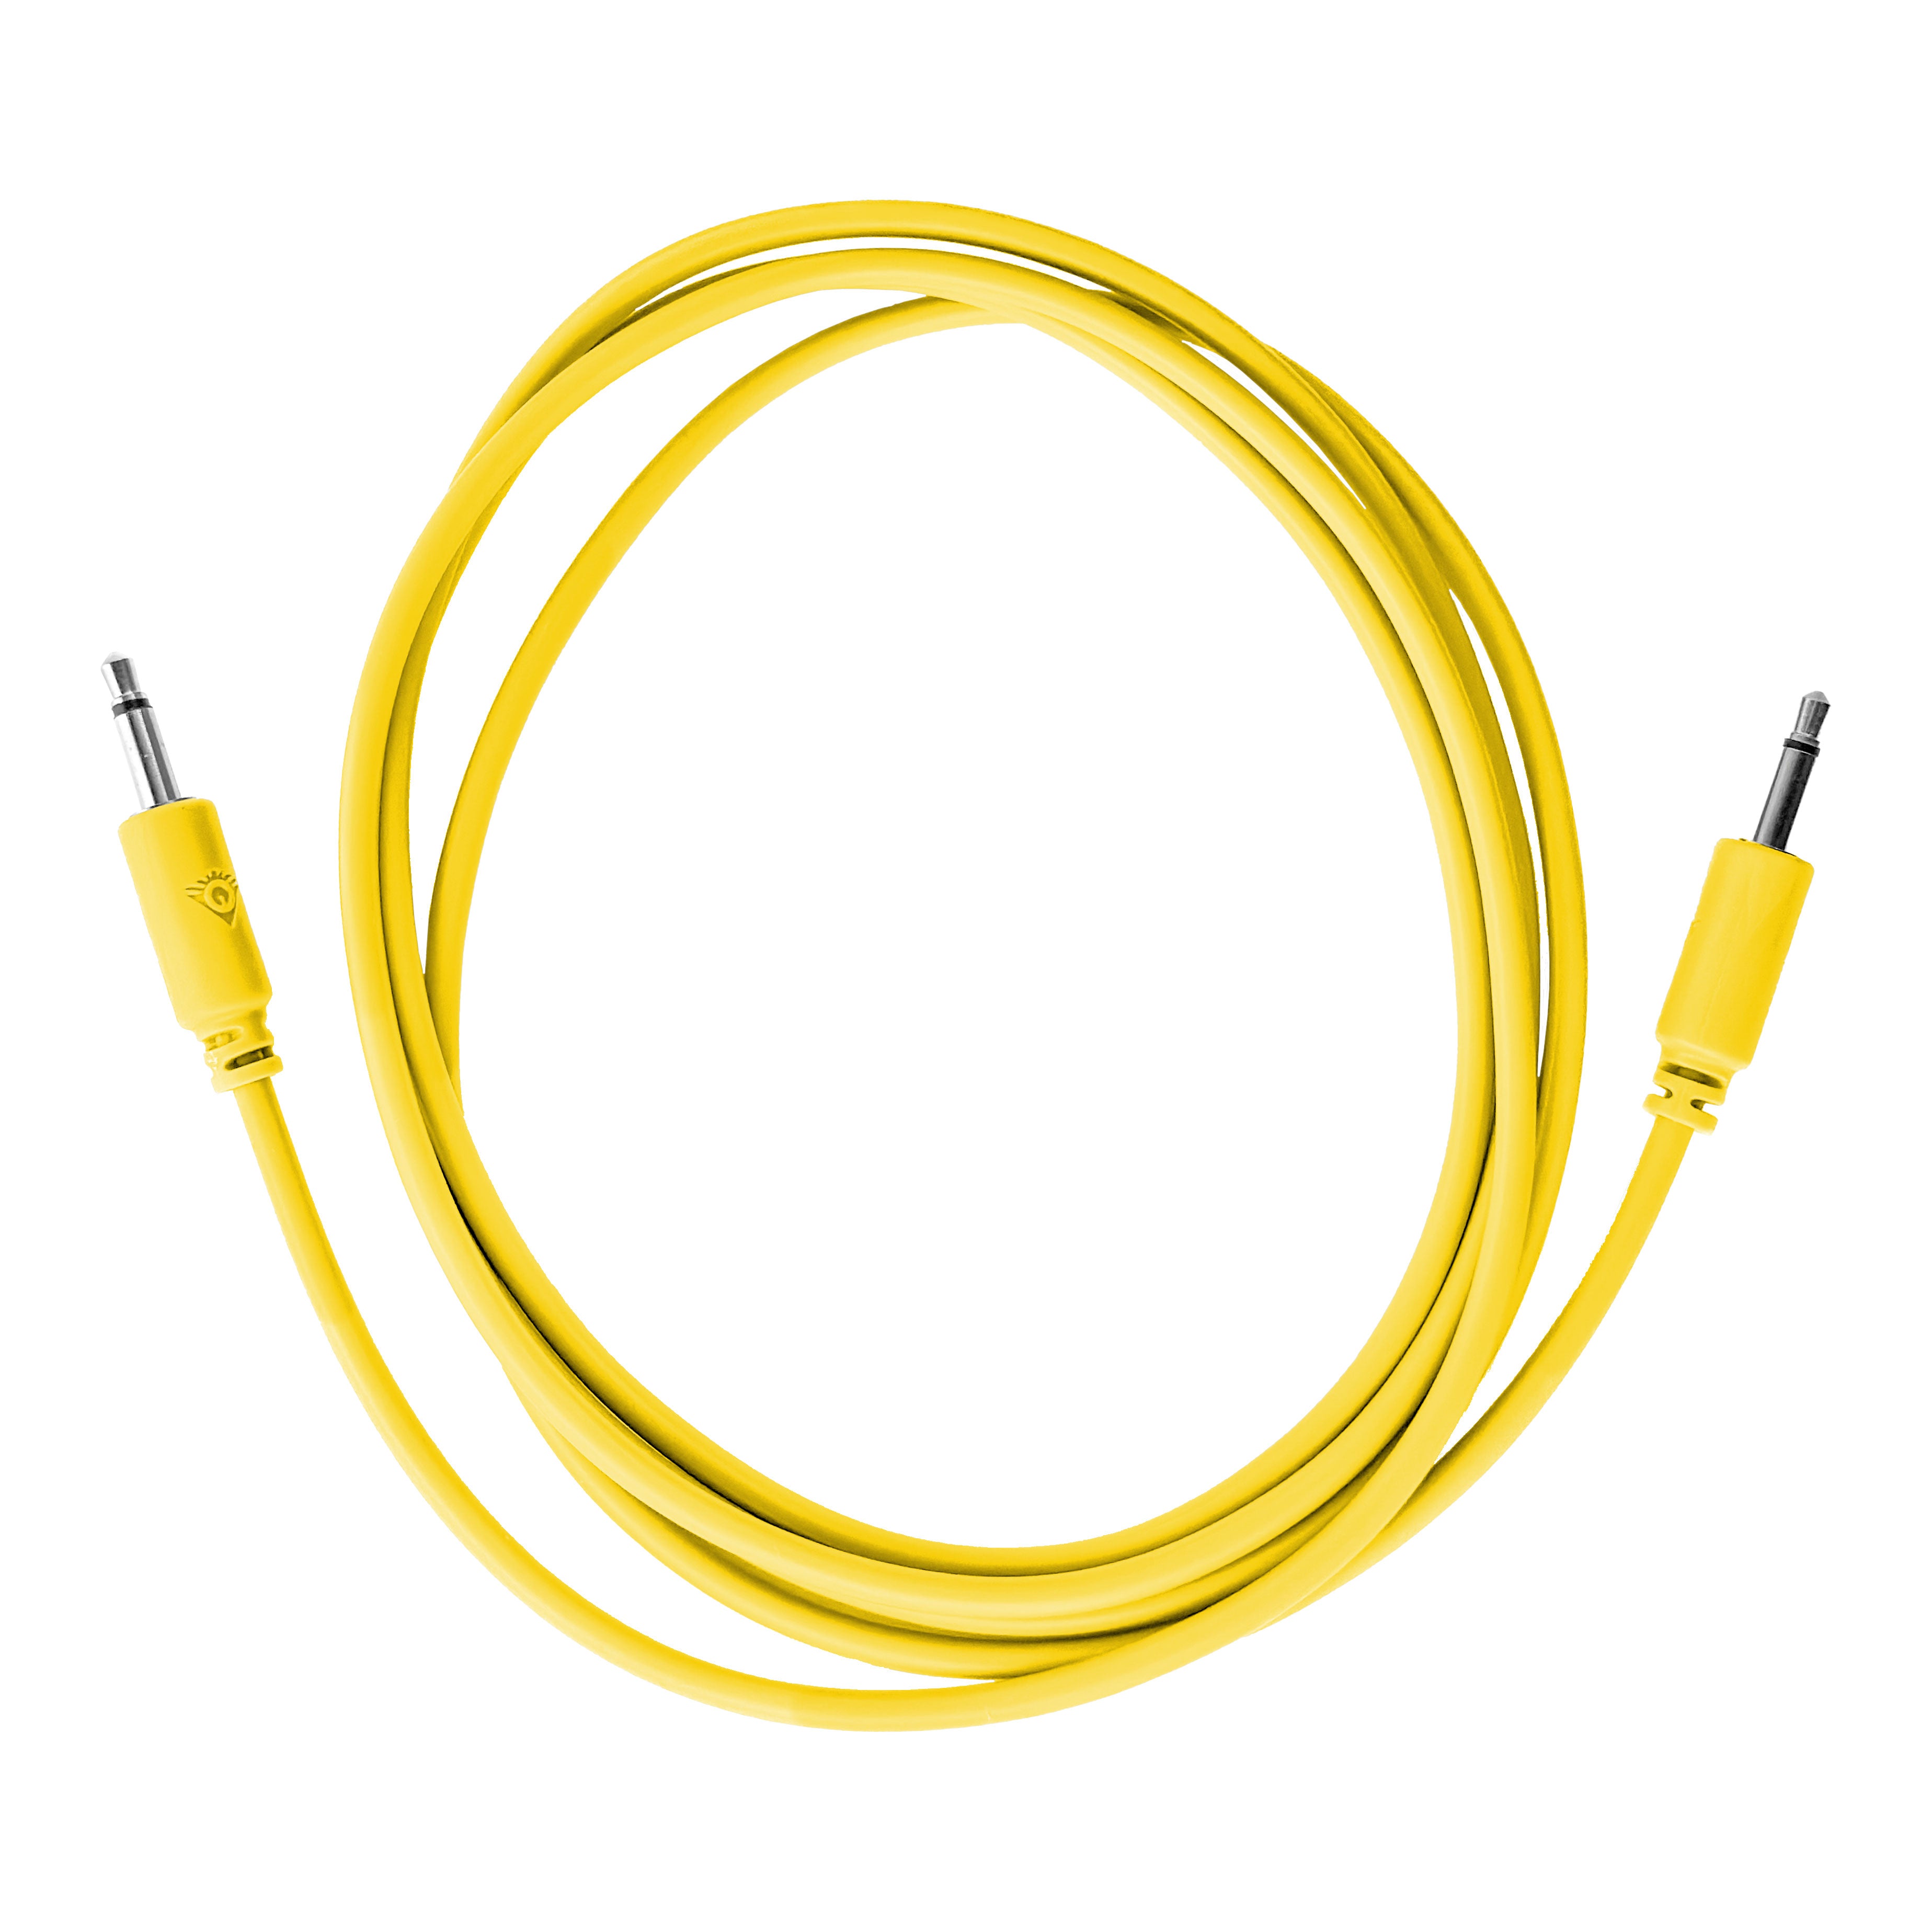 Black Market Modular 3.5mm Patch Cable - 150cm/60" - Yellow View 1